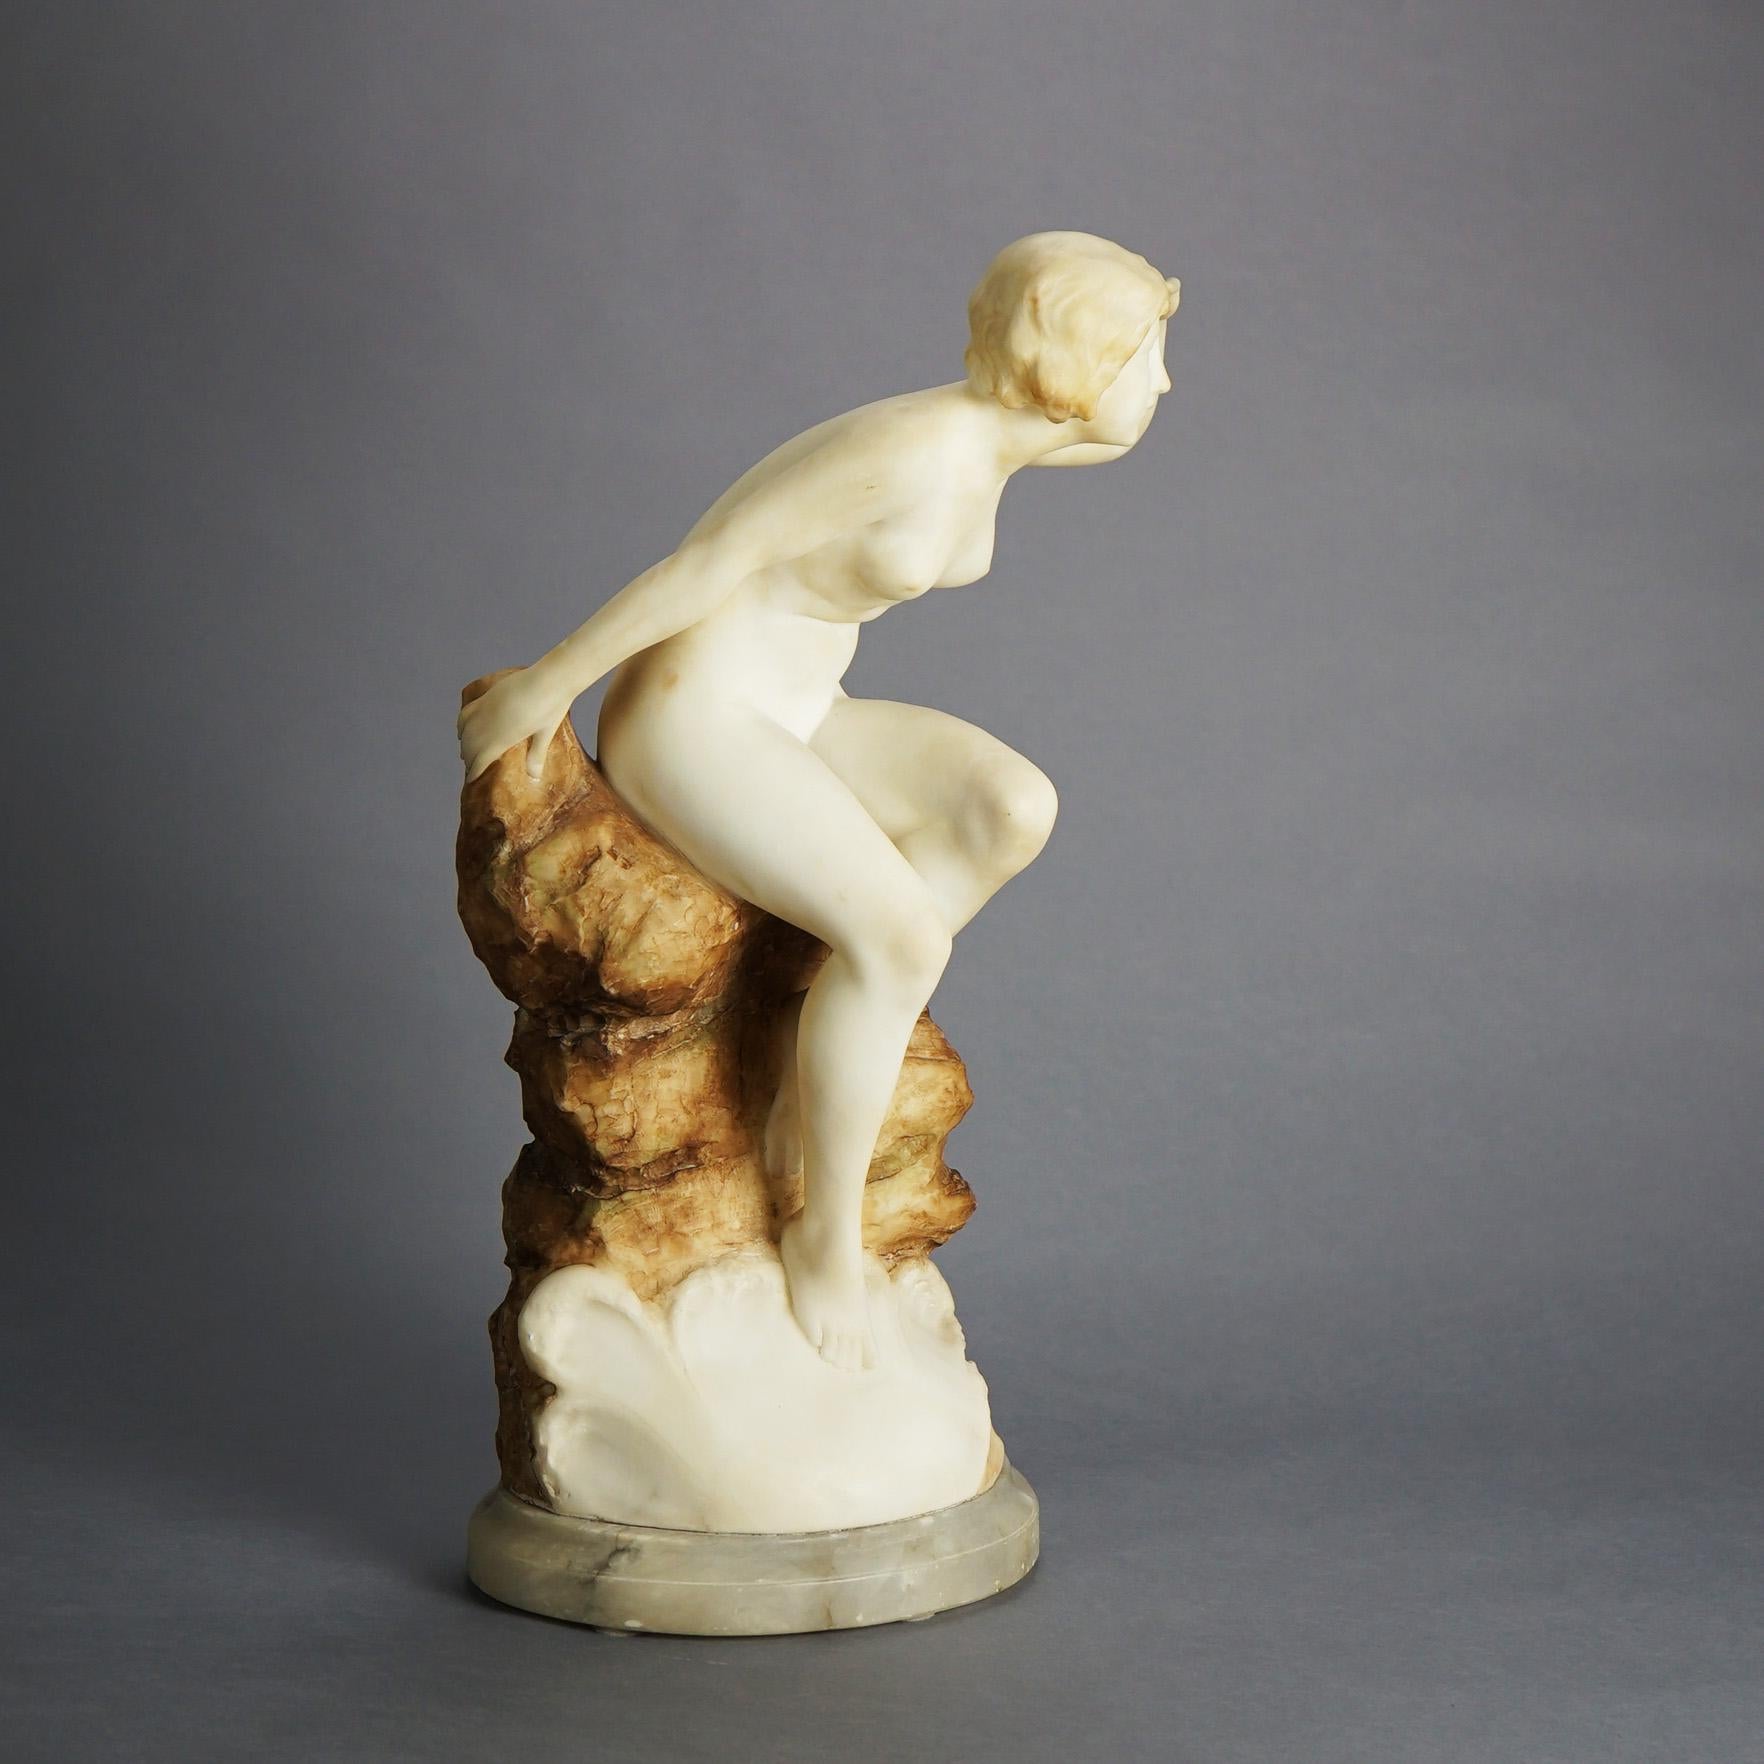 Antique Italian Carved Alabaster & Marble Sculpture by A. Del Porujia, Nude Sea Nymph Seated on the Shore Rocks Looking into the Sea, Signed, C1910

Measures- 21.75''H x 11''W x 10''D